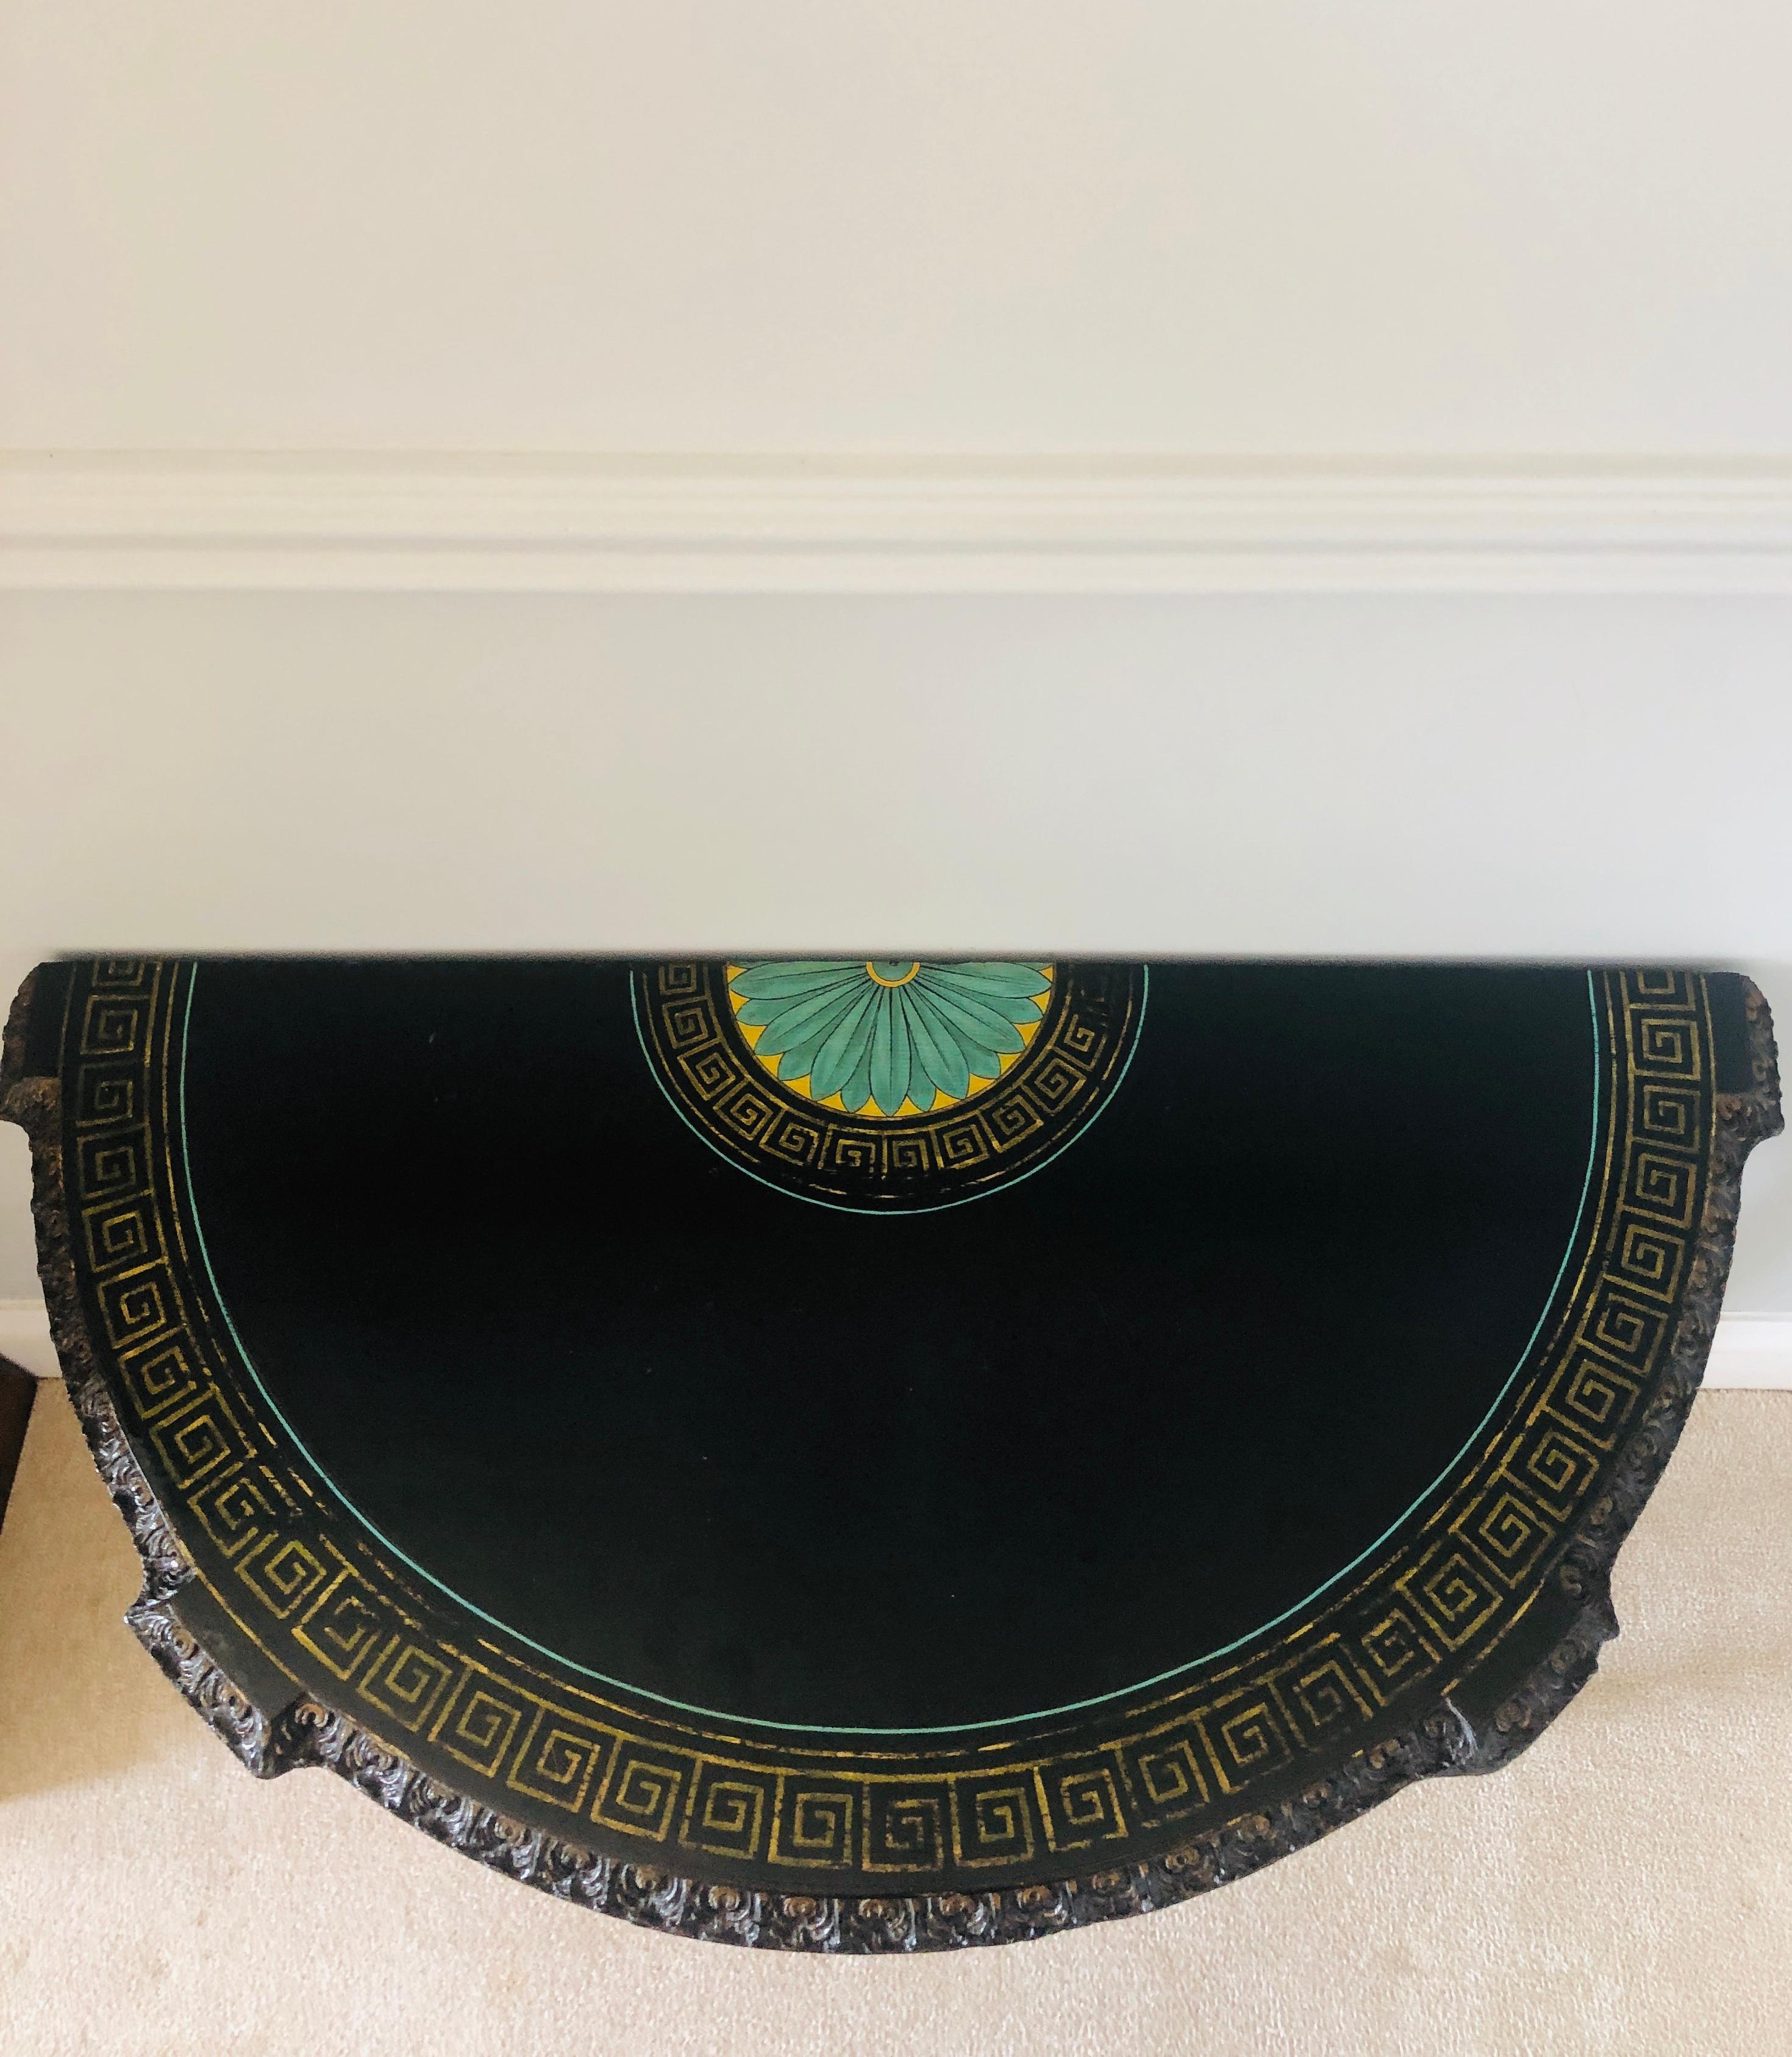 Fine carved French antique demilune shaped ebonized console table having a beautiful painted flower to the rear, delicate gold painted border pattern with a fine carved edge. Intricate carvings to the front and sides with a ribbon bow carved to the